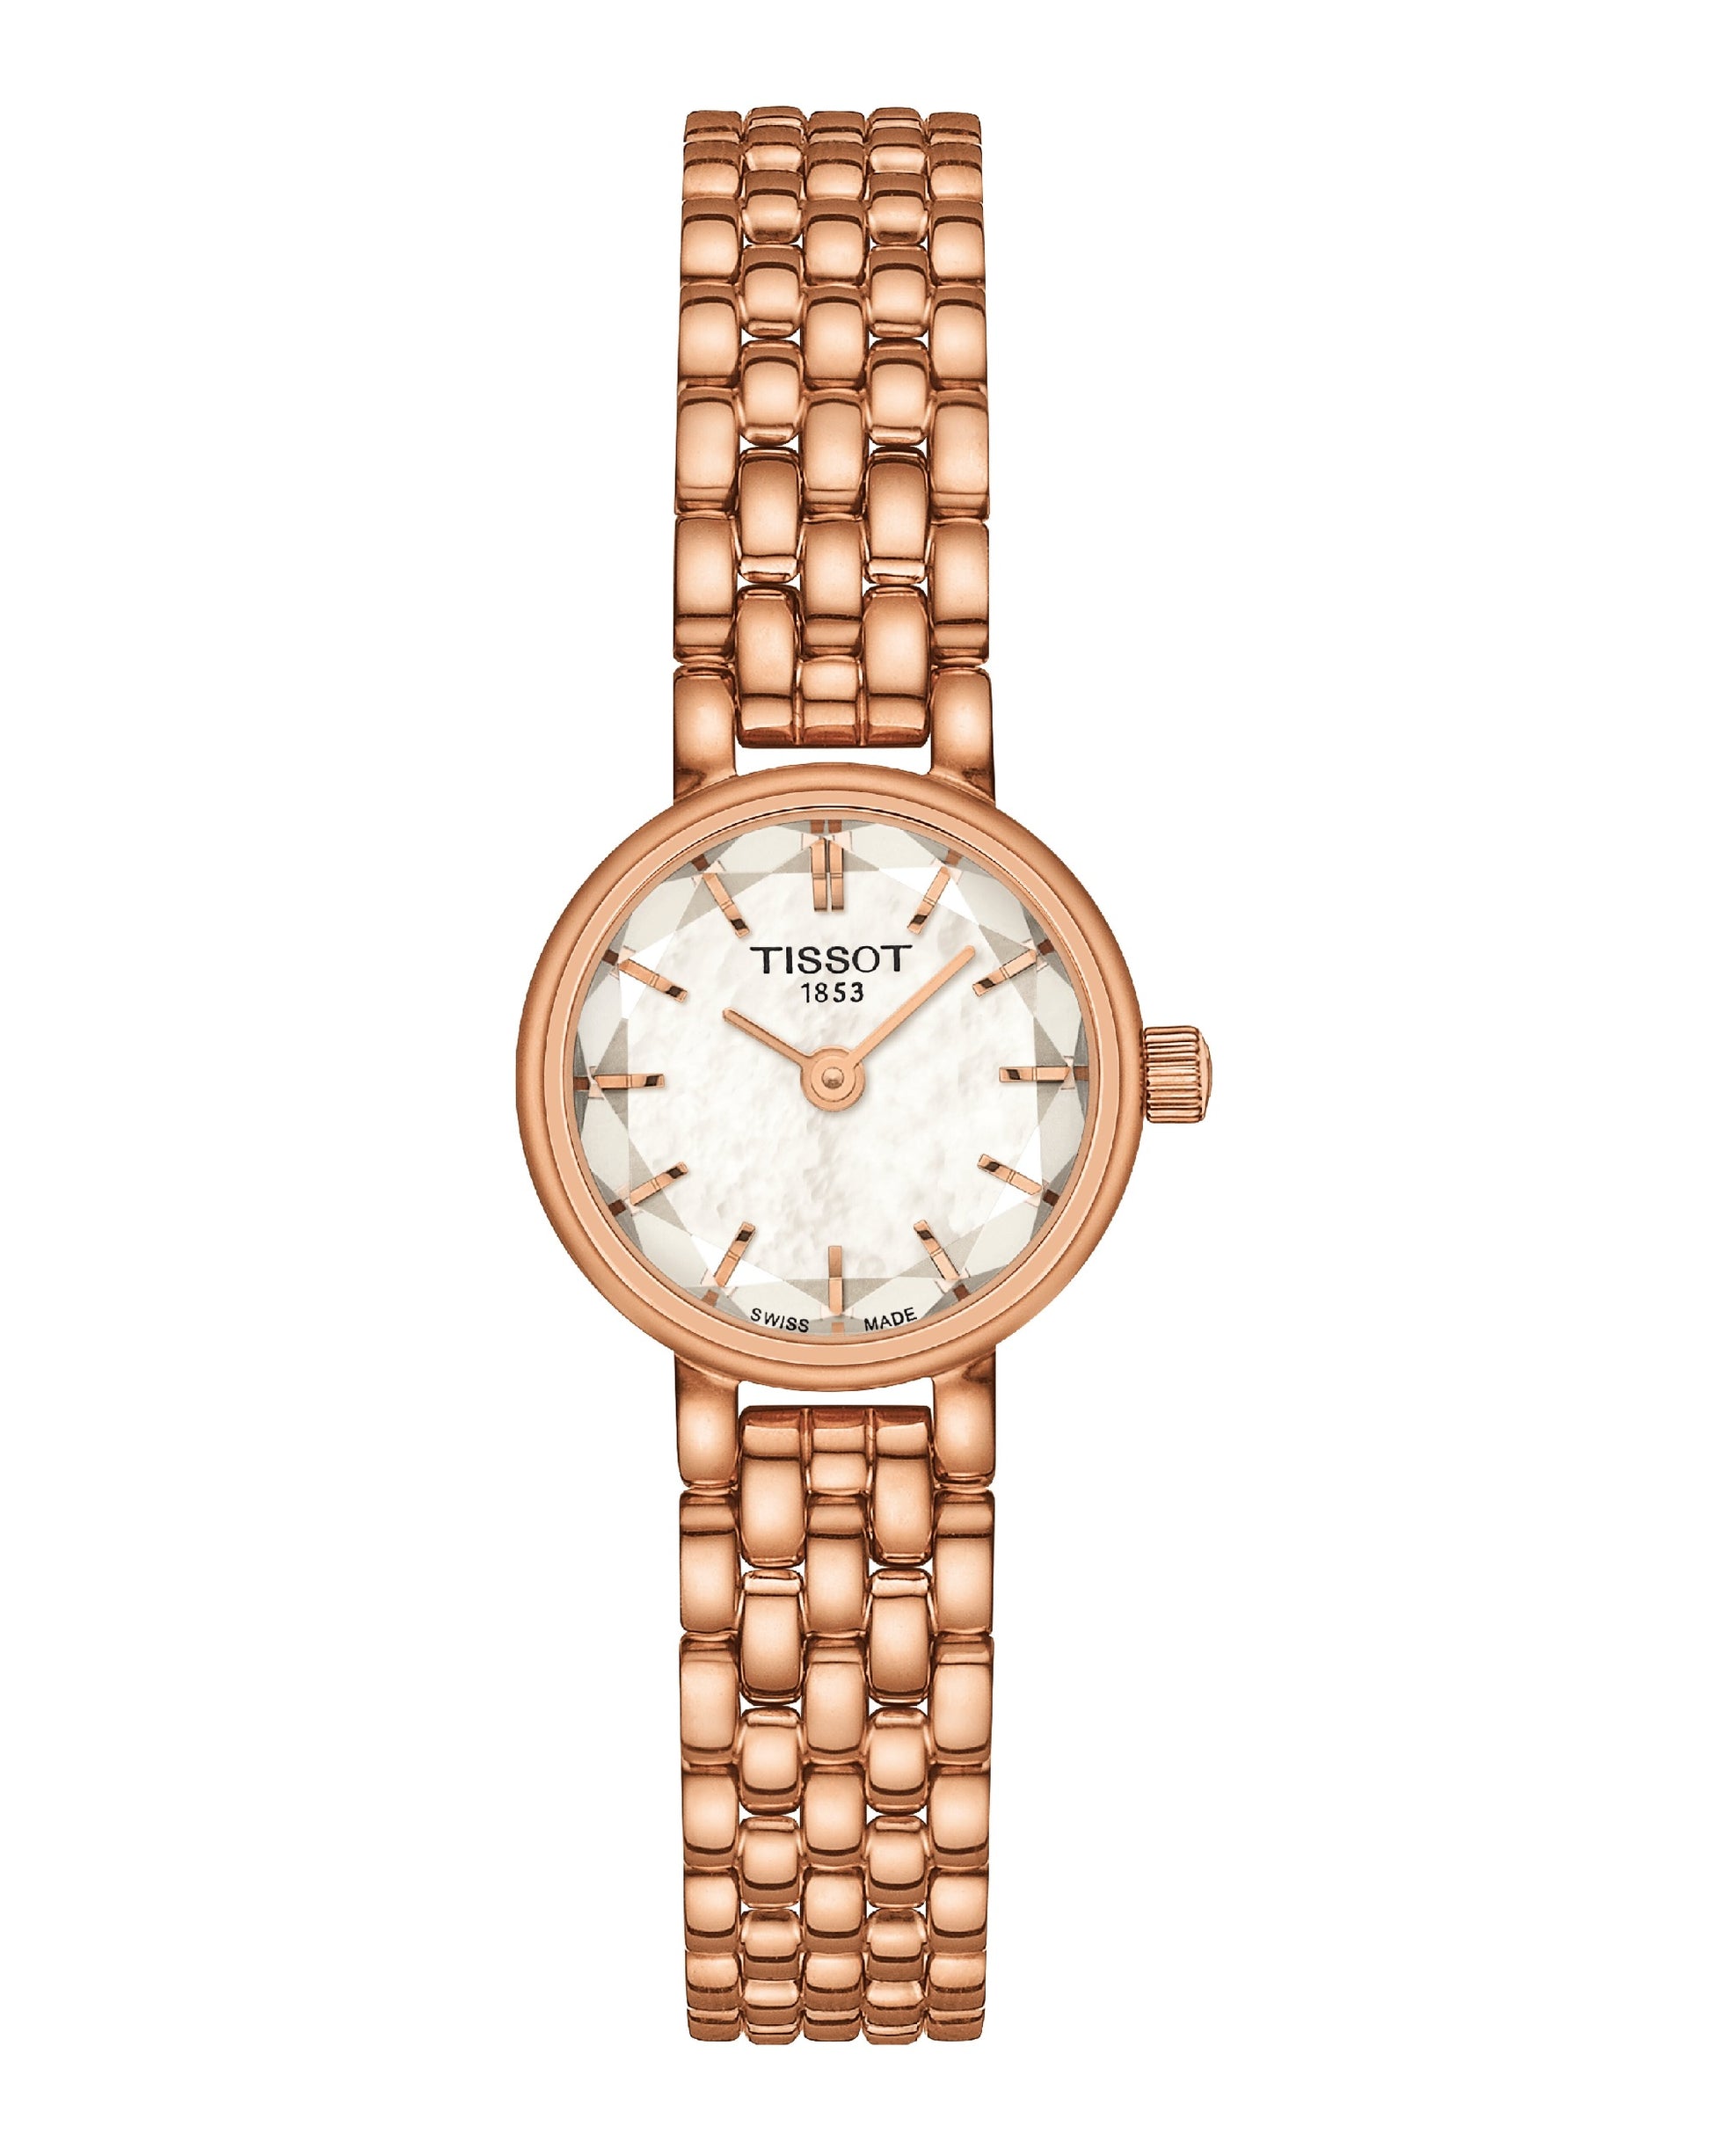 Tissot T140.009.33.111.00 Tissot LOVELY LADY'S Mother Pearl Dial Watch